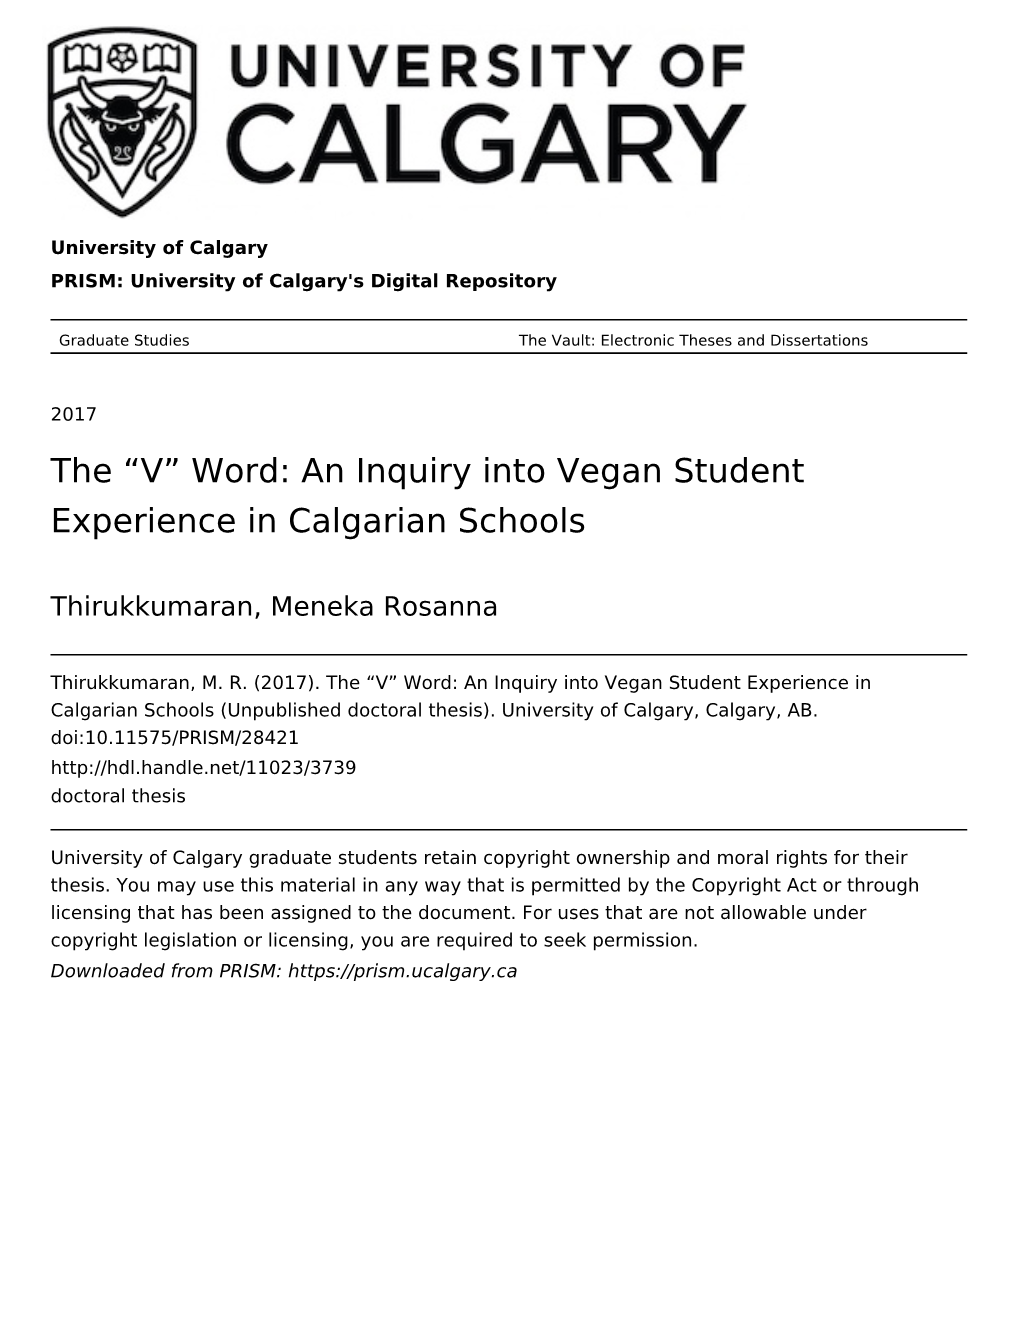 An Inquiry Into Vegan Student Experience in Calgarian Schools